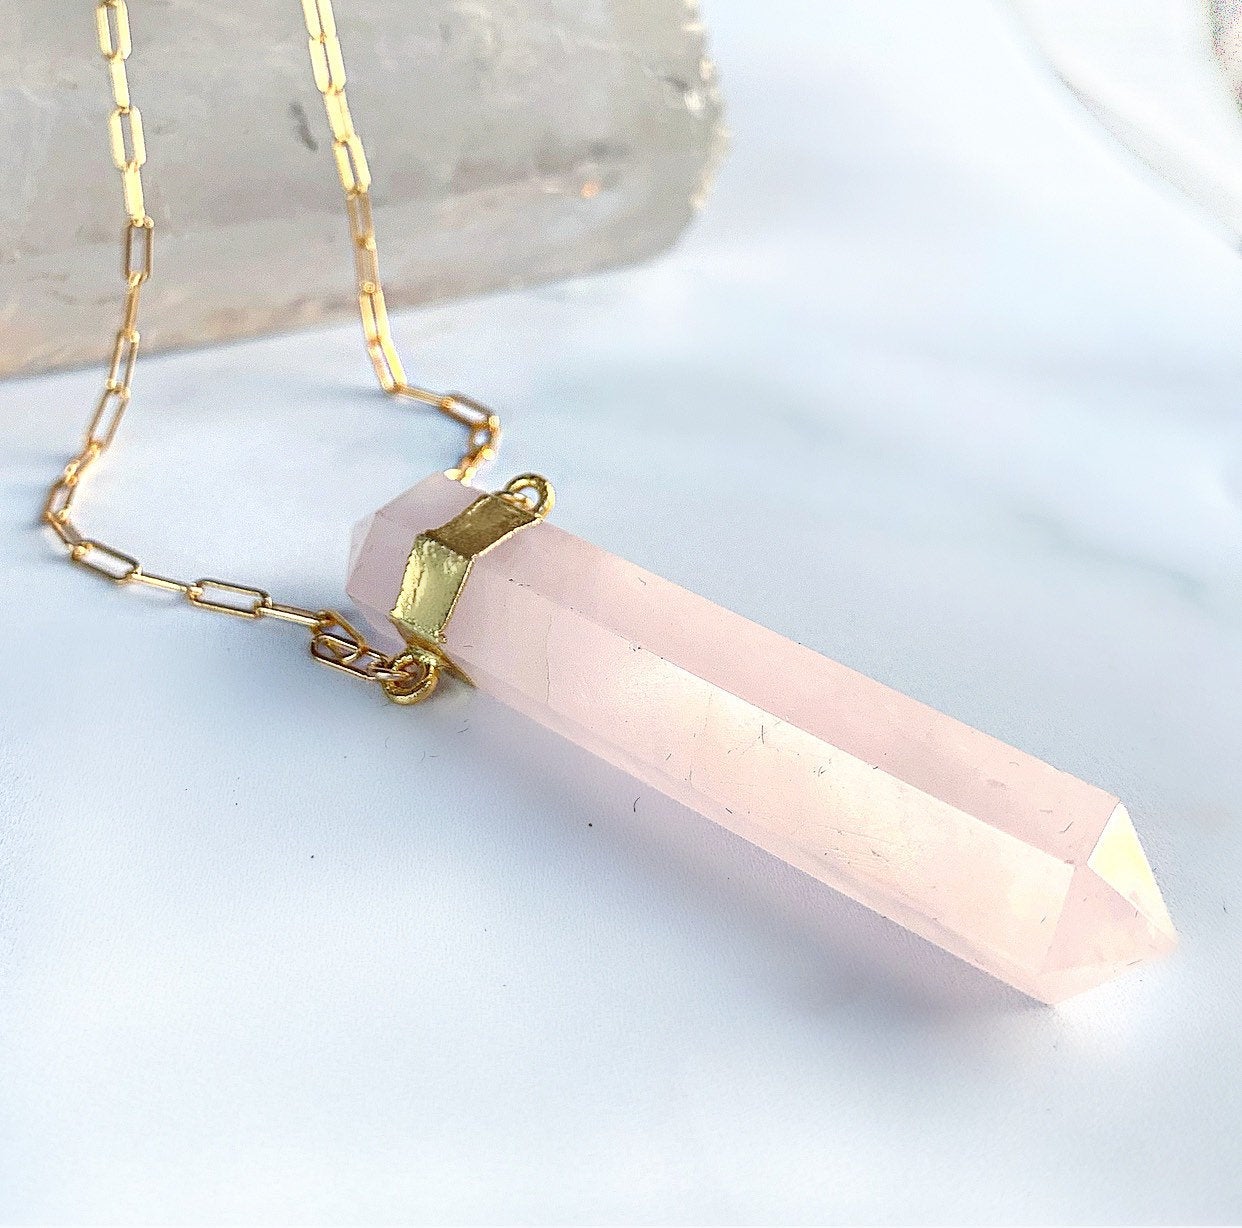 Buy Heart Chakra, Raw Rose Quartz Necklace, Love Necklace, Stone Gift, Pink  Crystal, Natural Stone Pendant, Sterling Silver Chain Online in India - Etsy